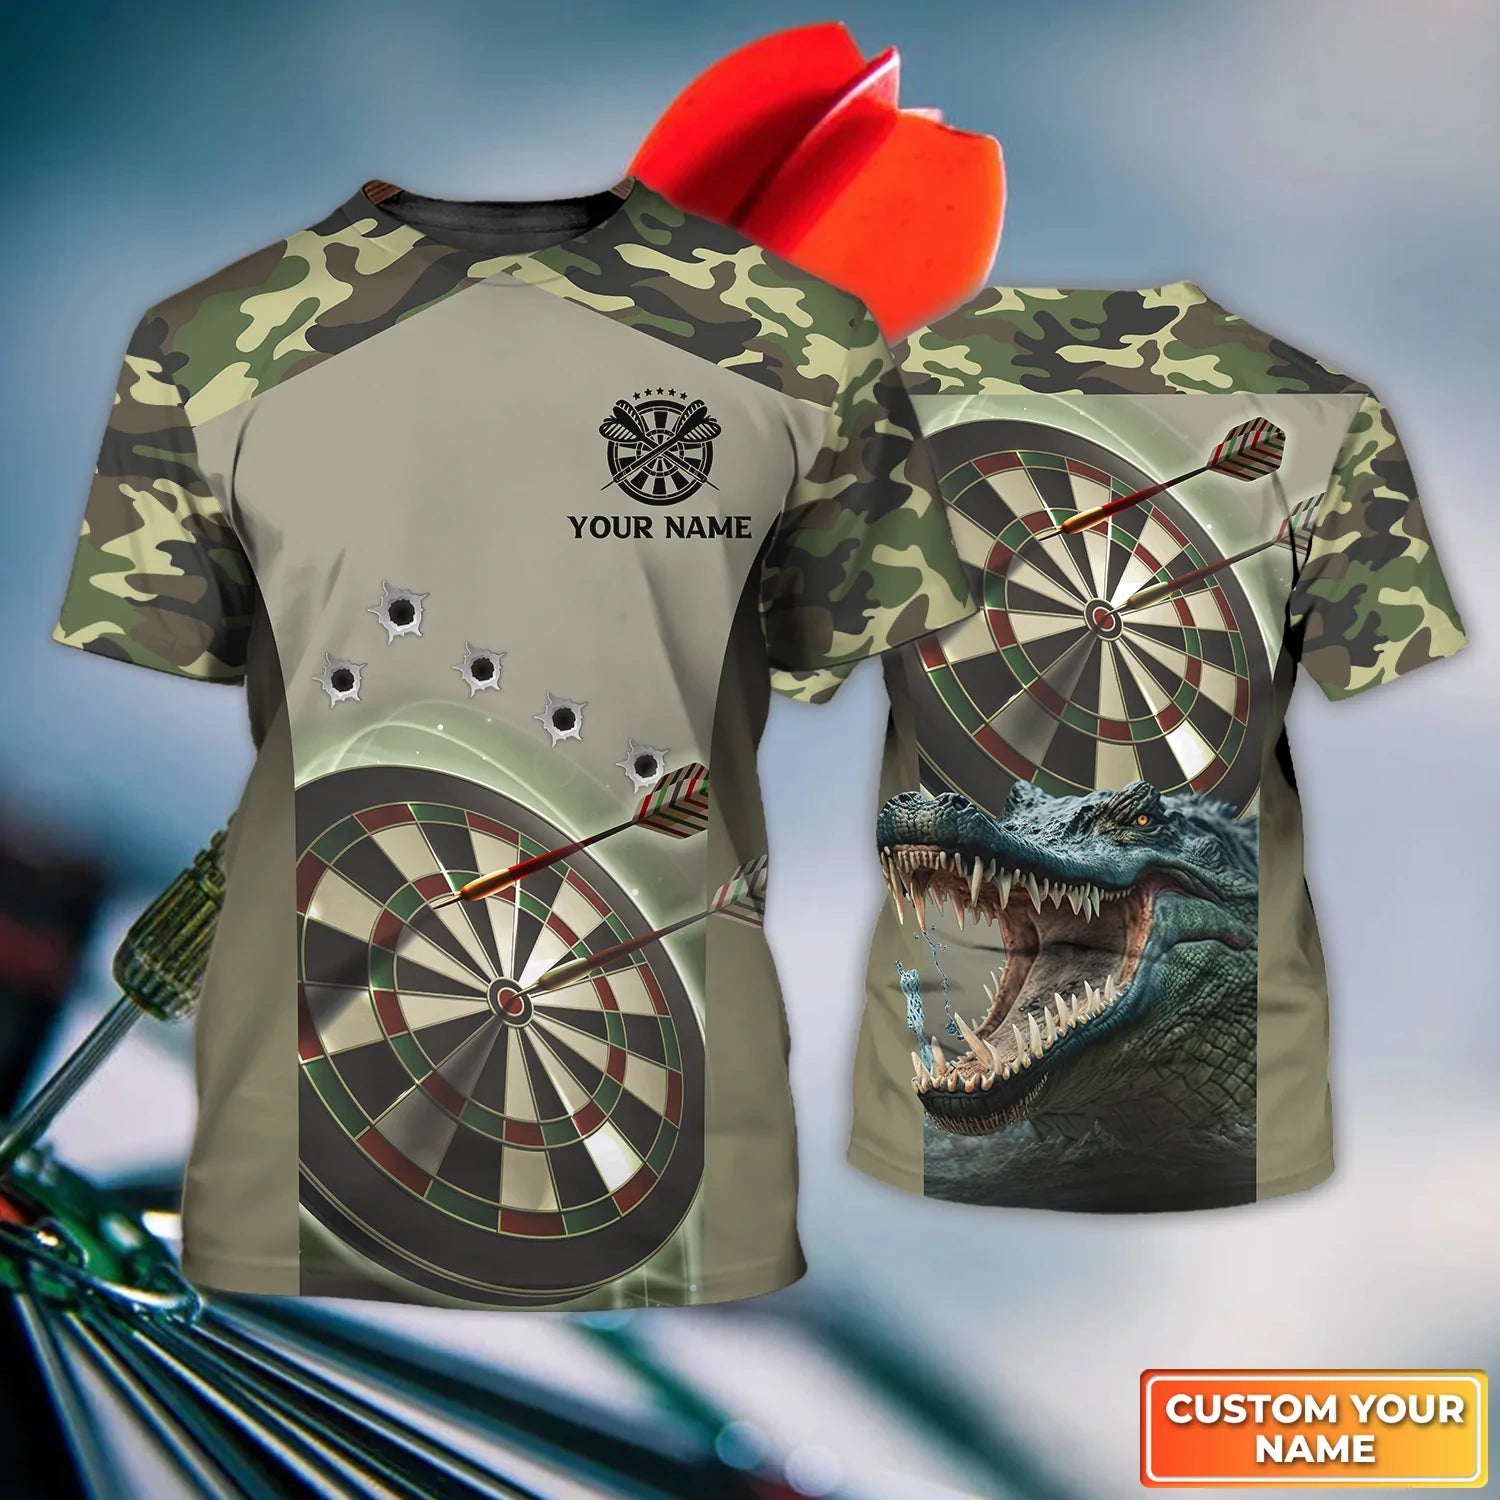 Bullseye Dartboard Personalized Name 3D Shark And Darts Tshirt For Dart Team Player – DT074